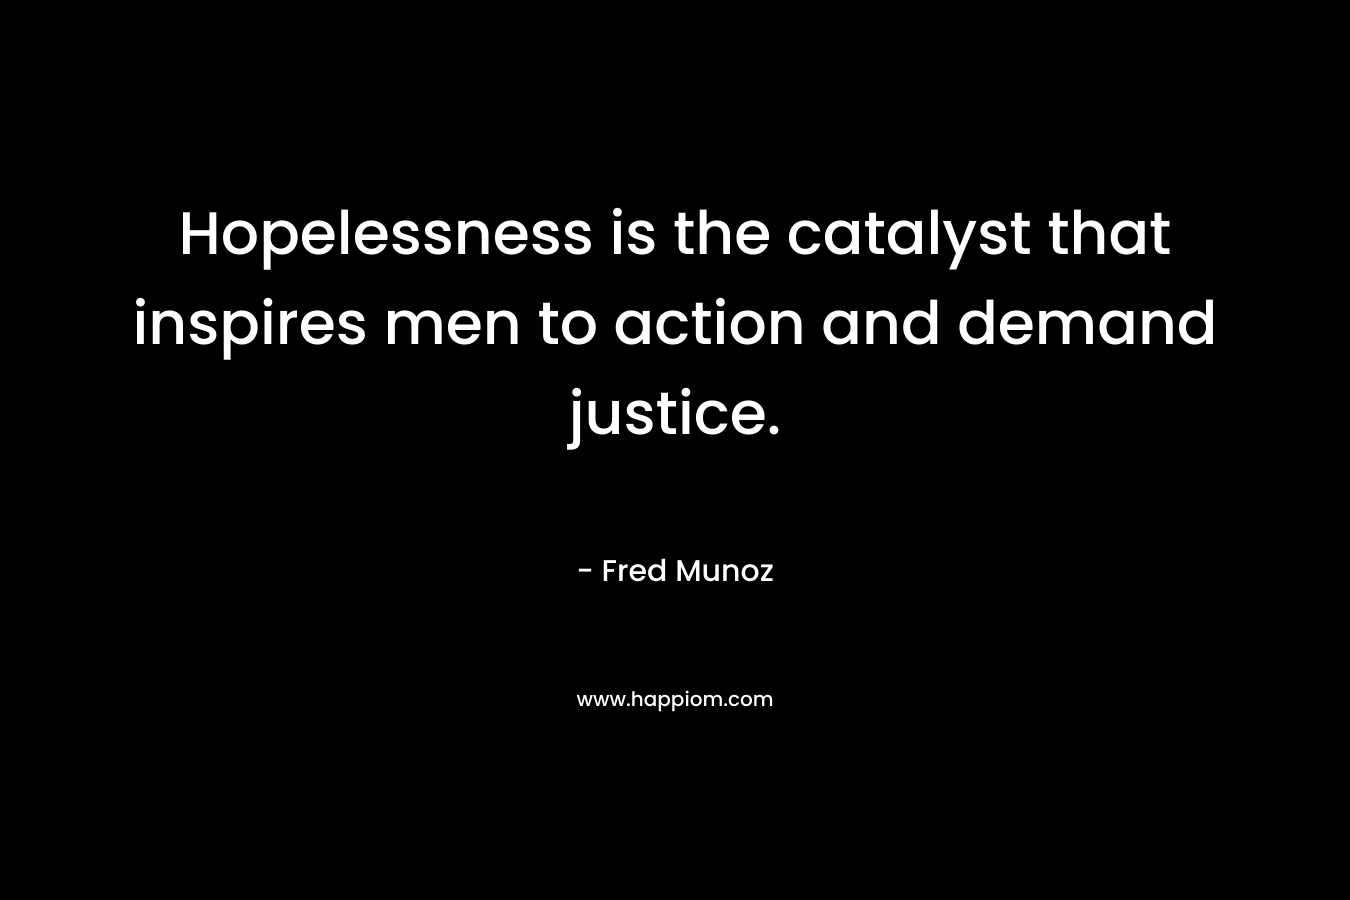 Hopelessness is the catalyst that inspires men to action and demand justice. – Fred Munoz